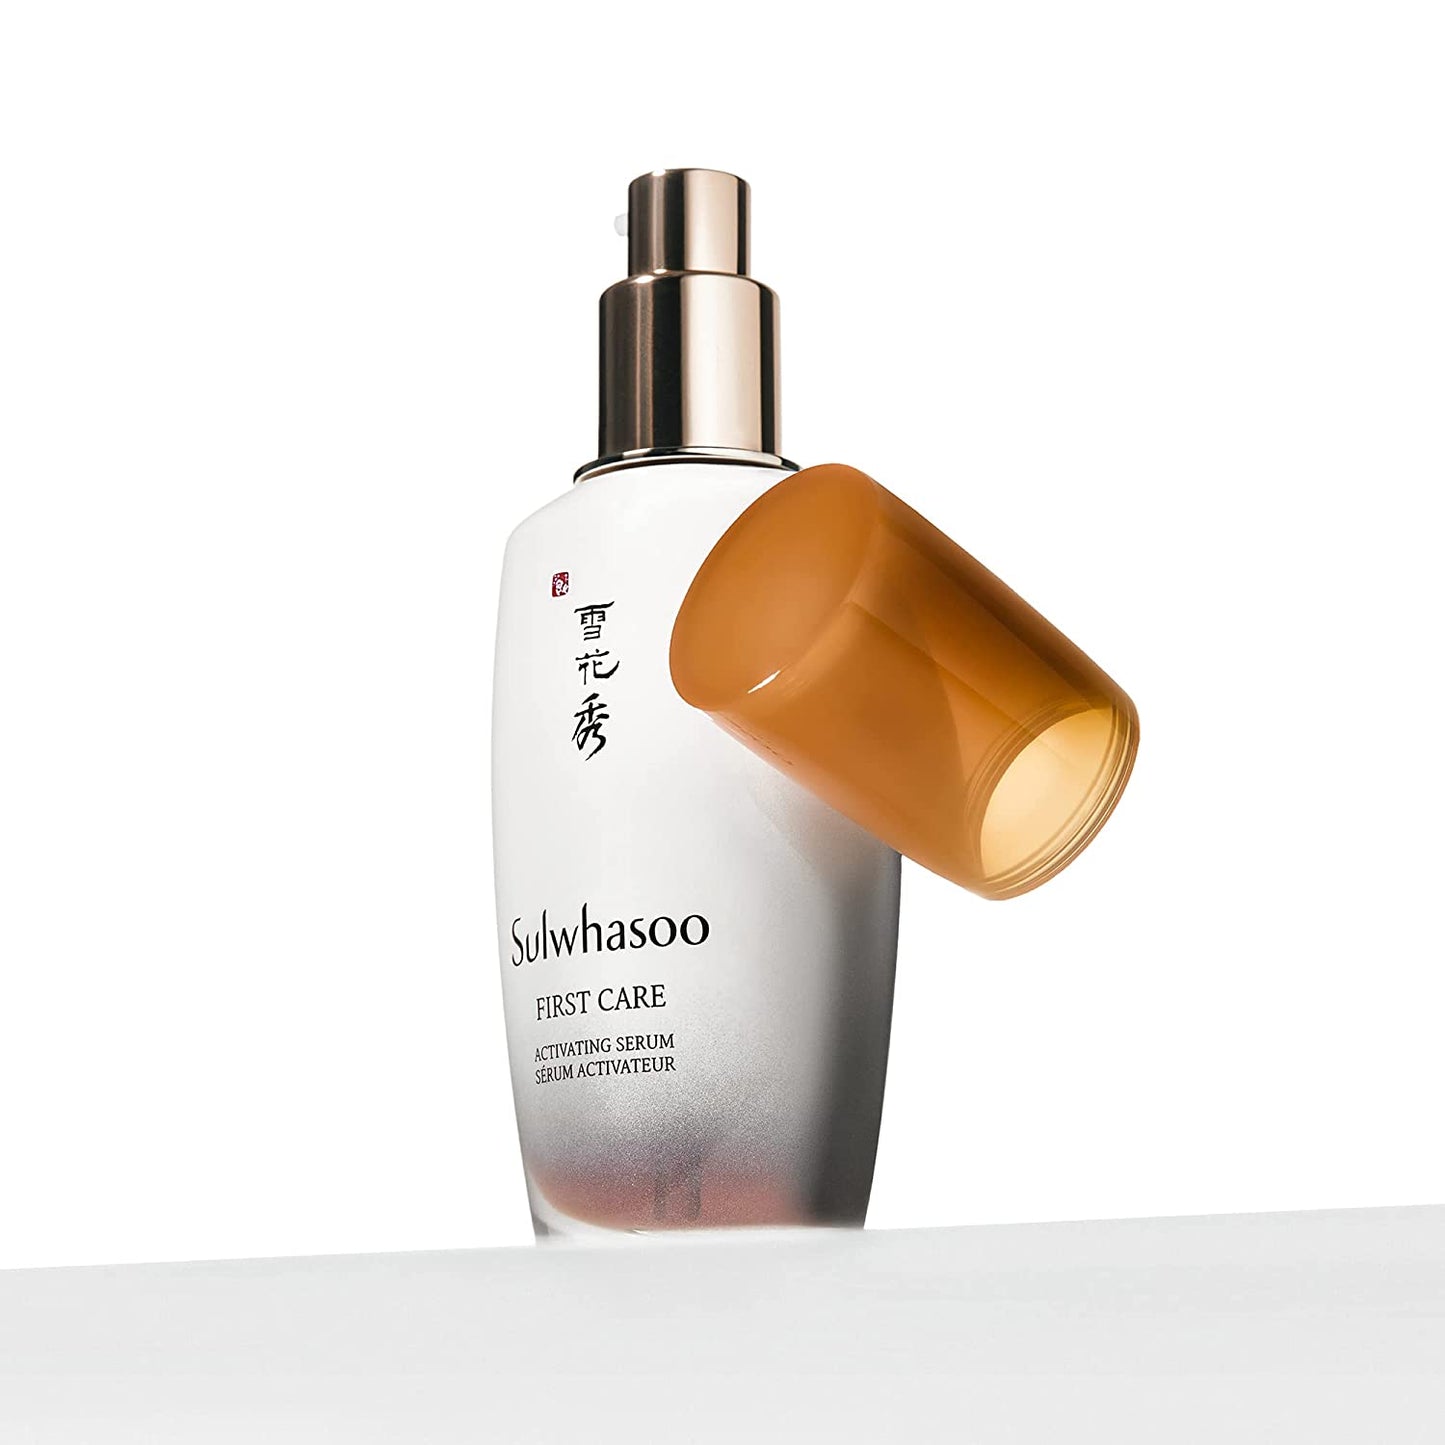 Sulwhasoo First Care Activating Serum 2.02 Fl. Oz./ 60 mL